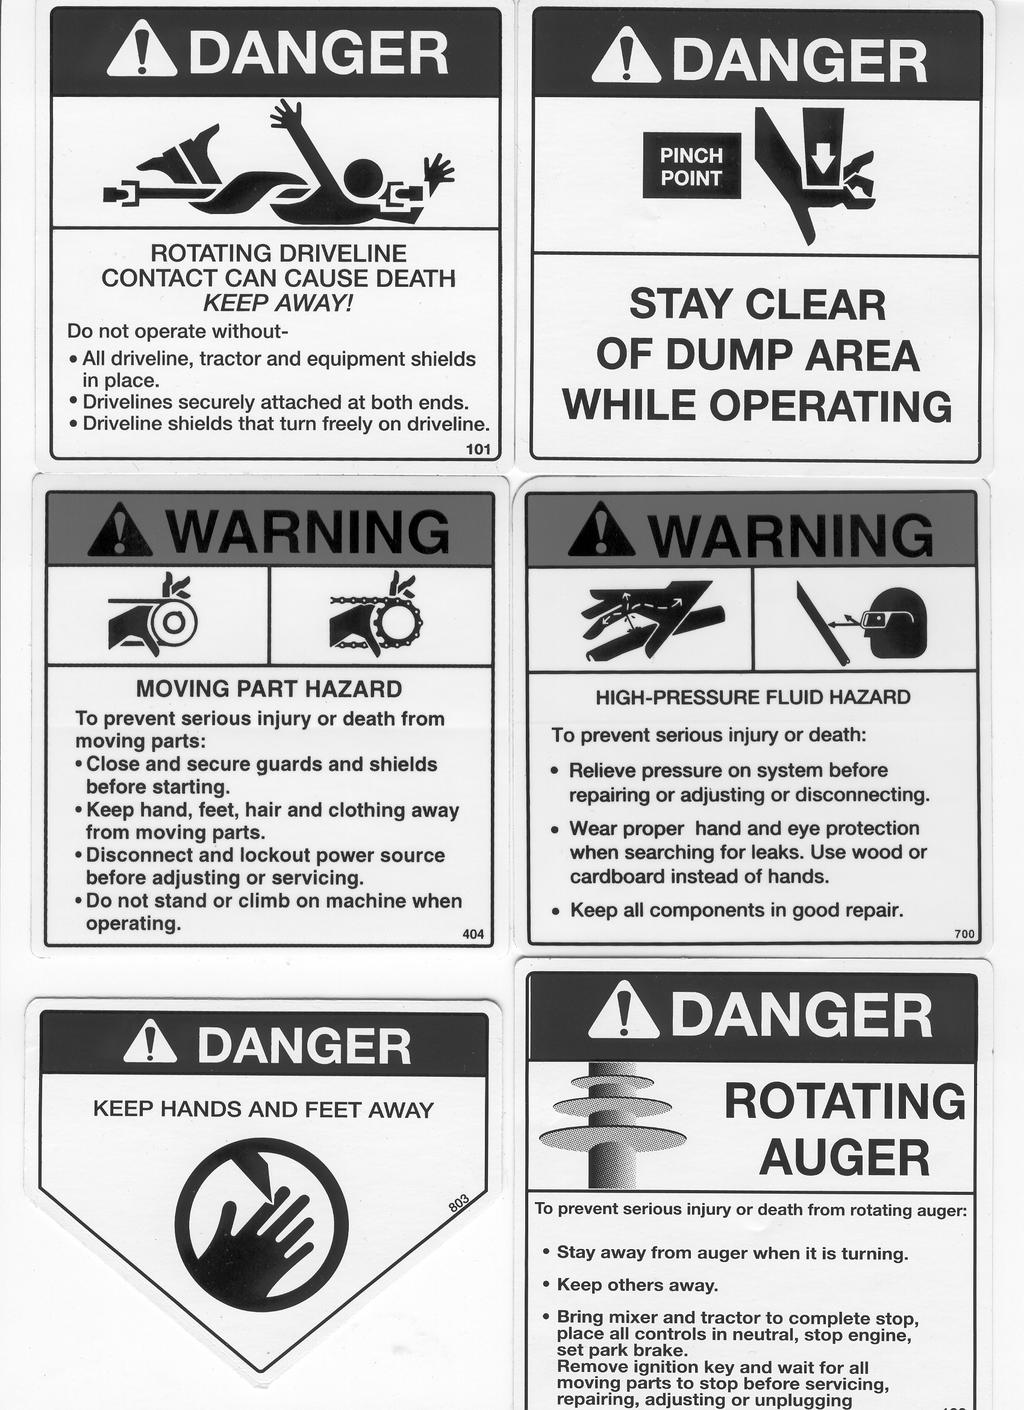 The safety decals